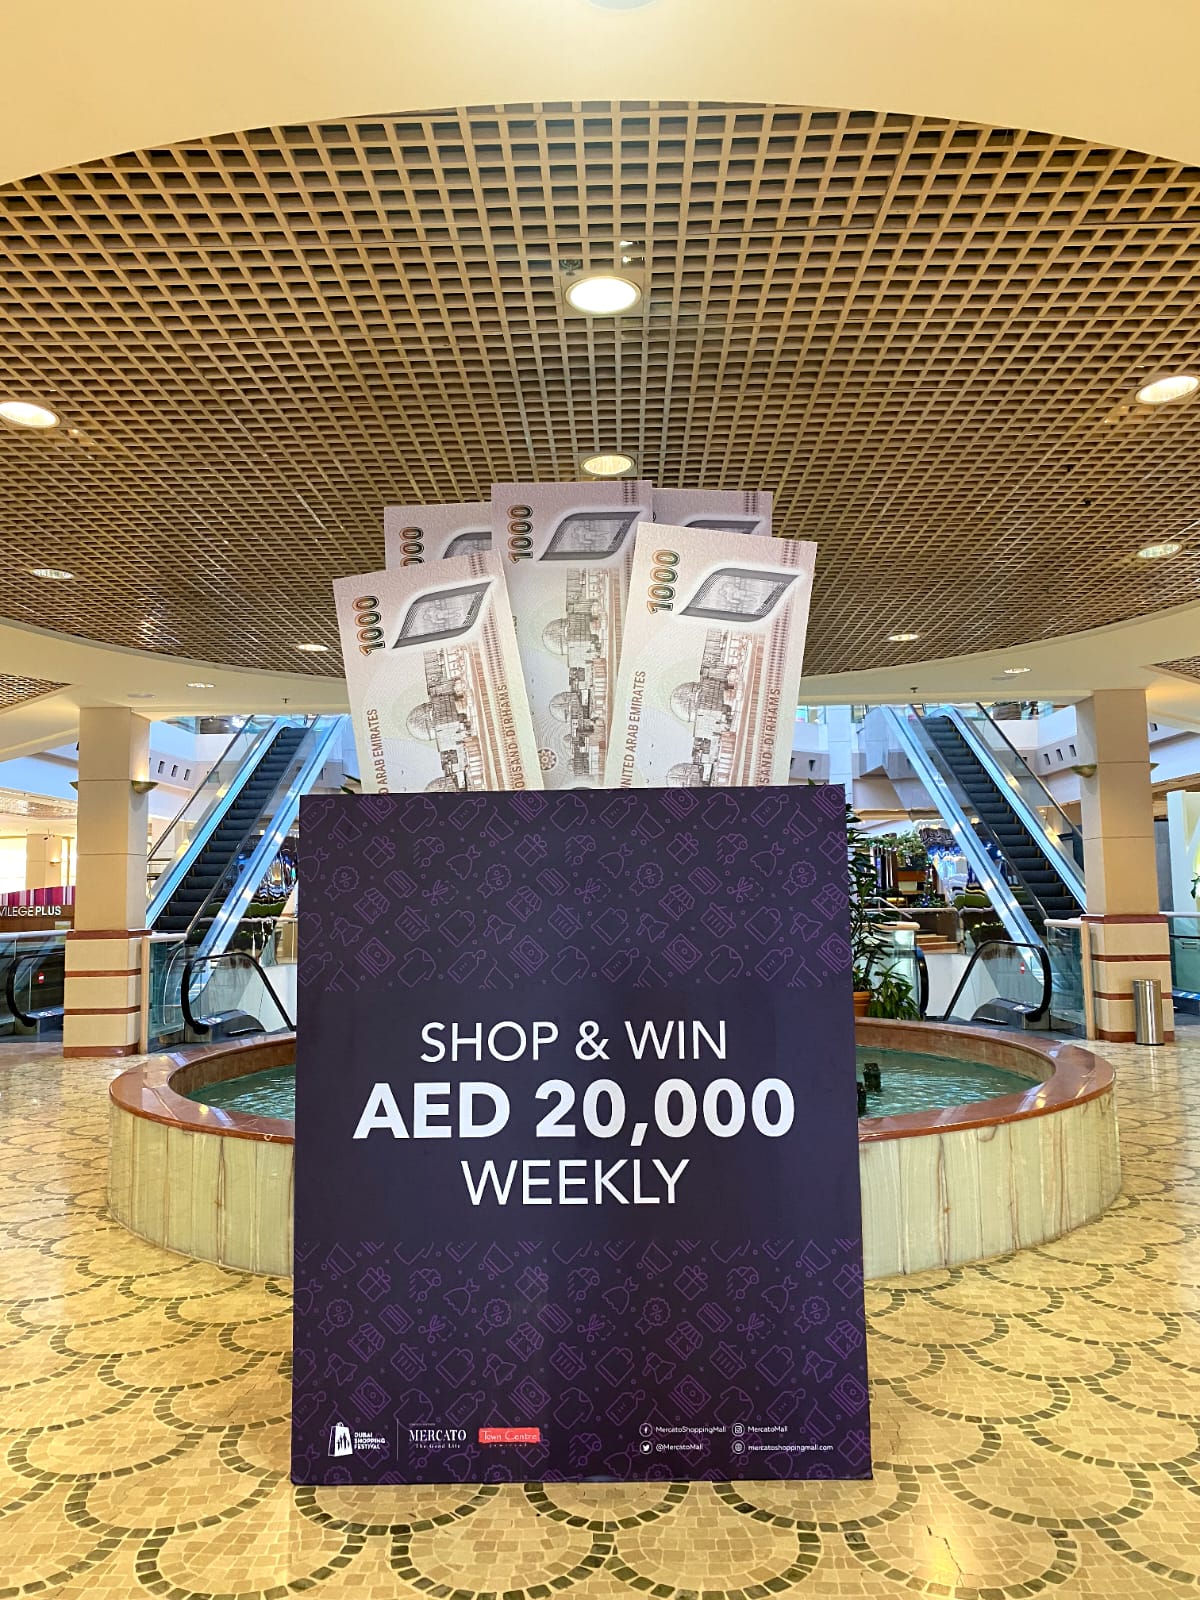 Town Centre Jumeirah offers ‘Shop and Win’ weekly cash prizes worth AED 20,000 this Dubai Shopping Festival